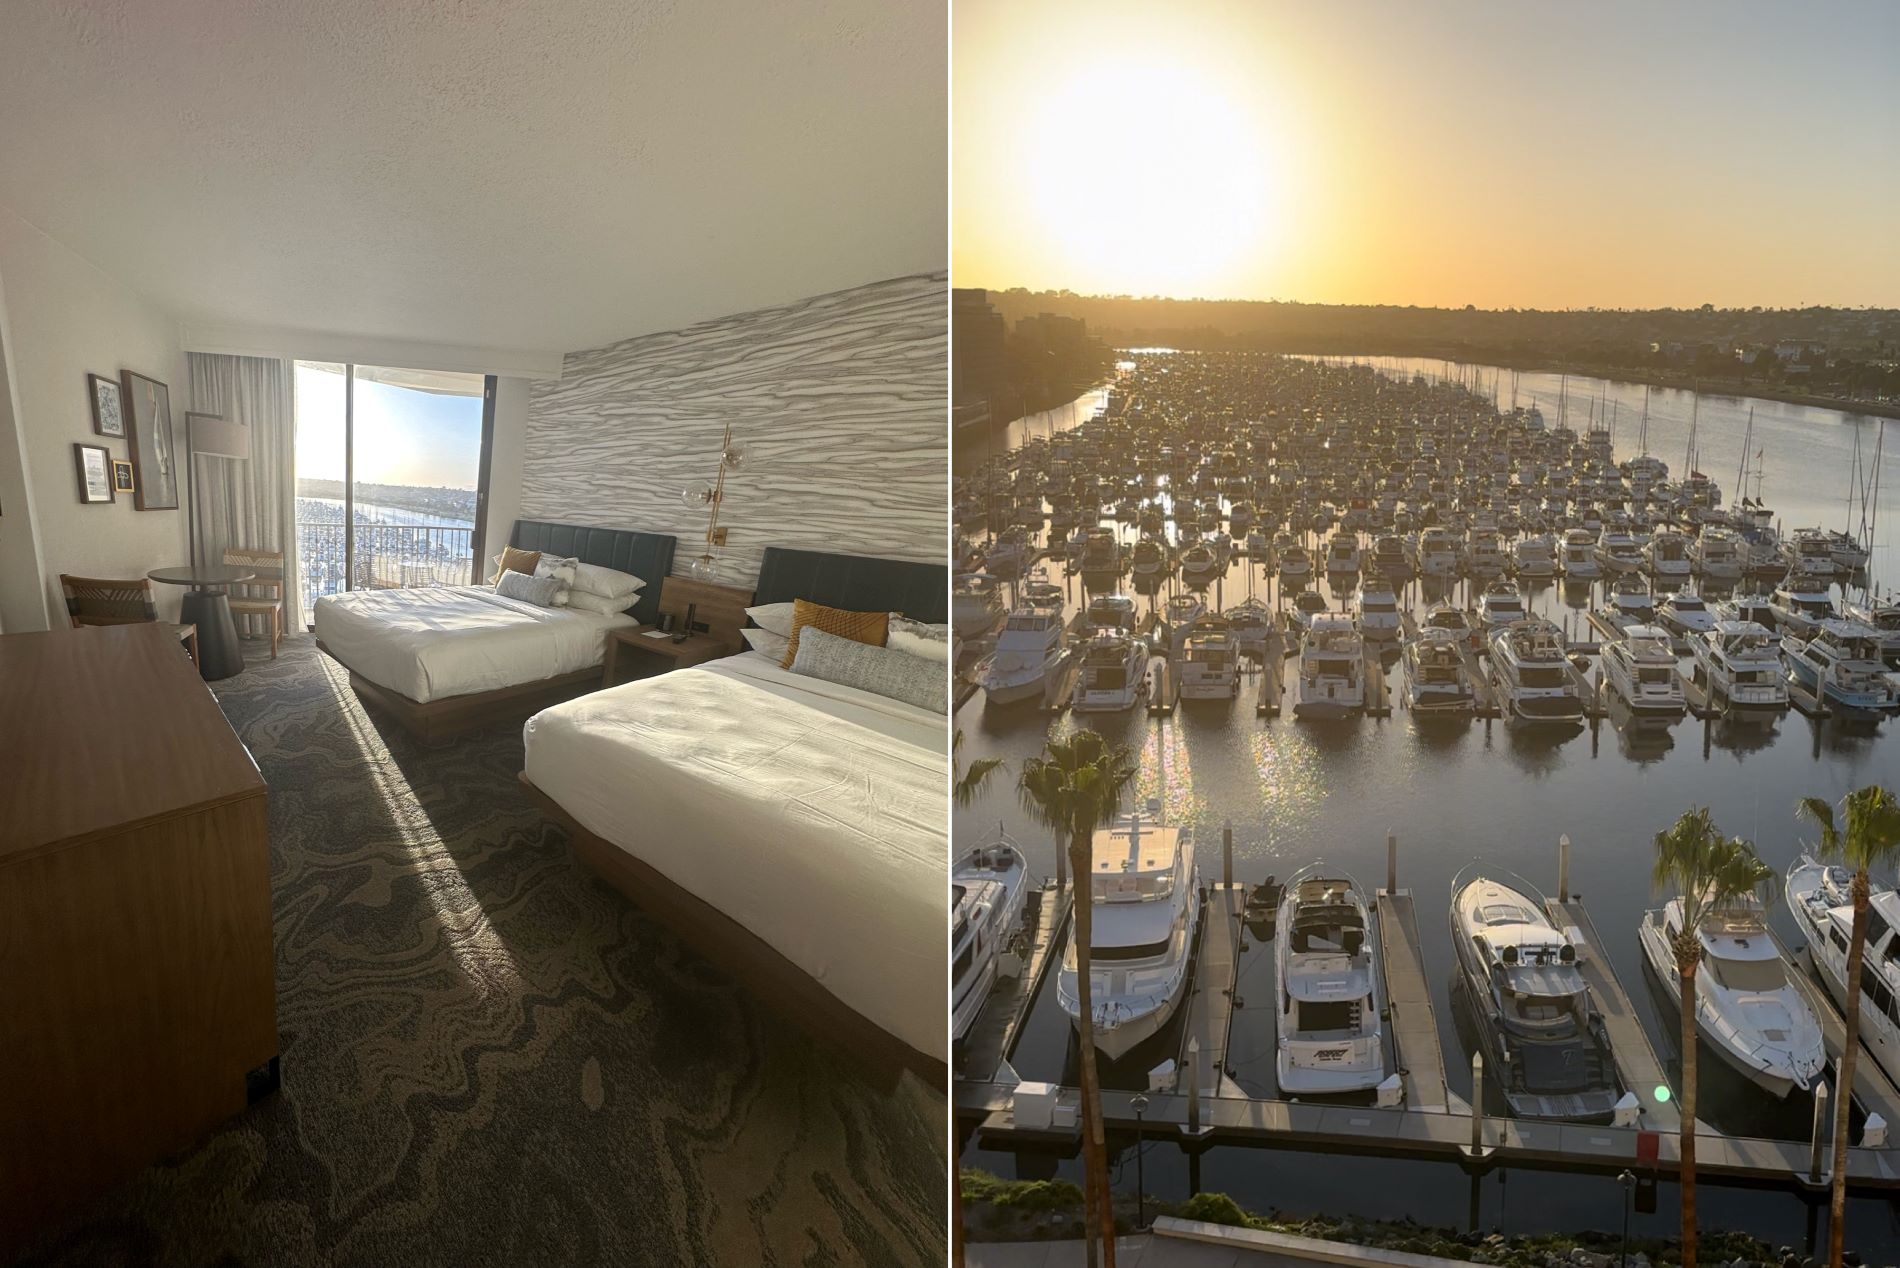 An image of a hotel room and the marina from the hotel balcony.